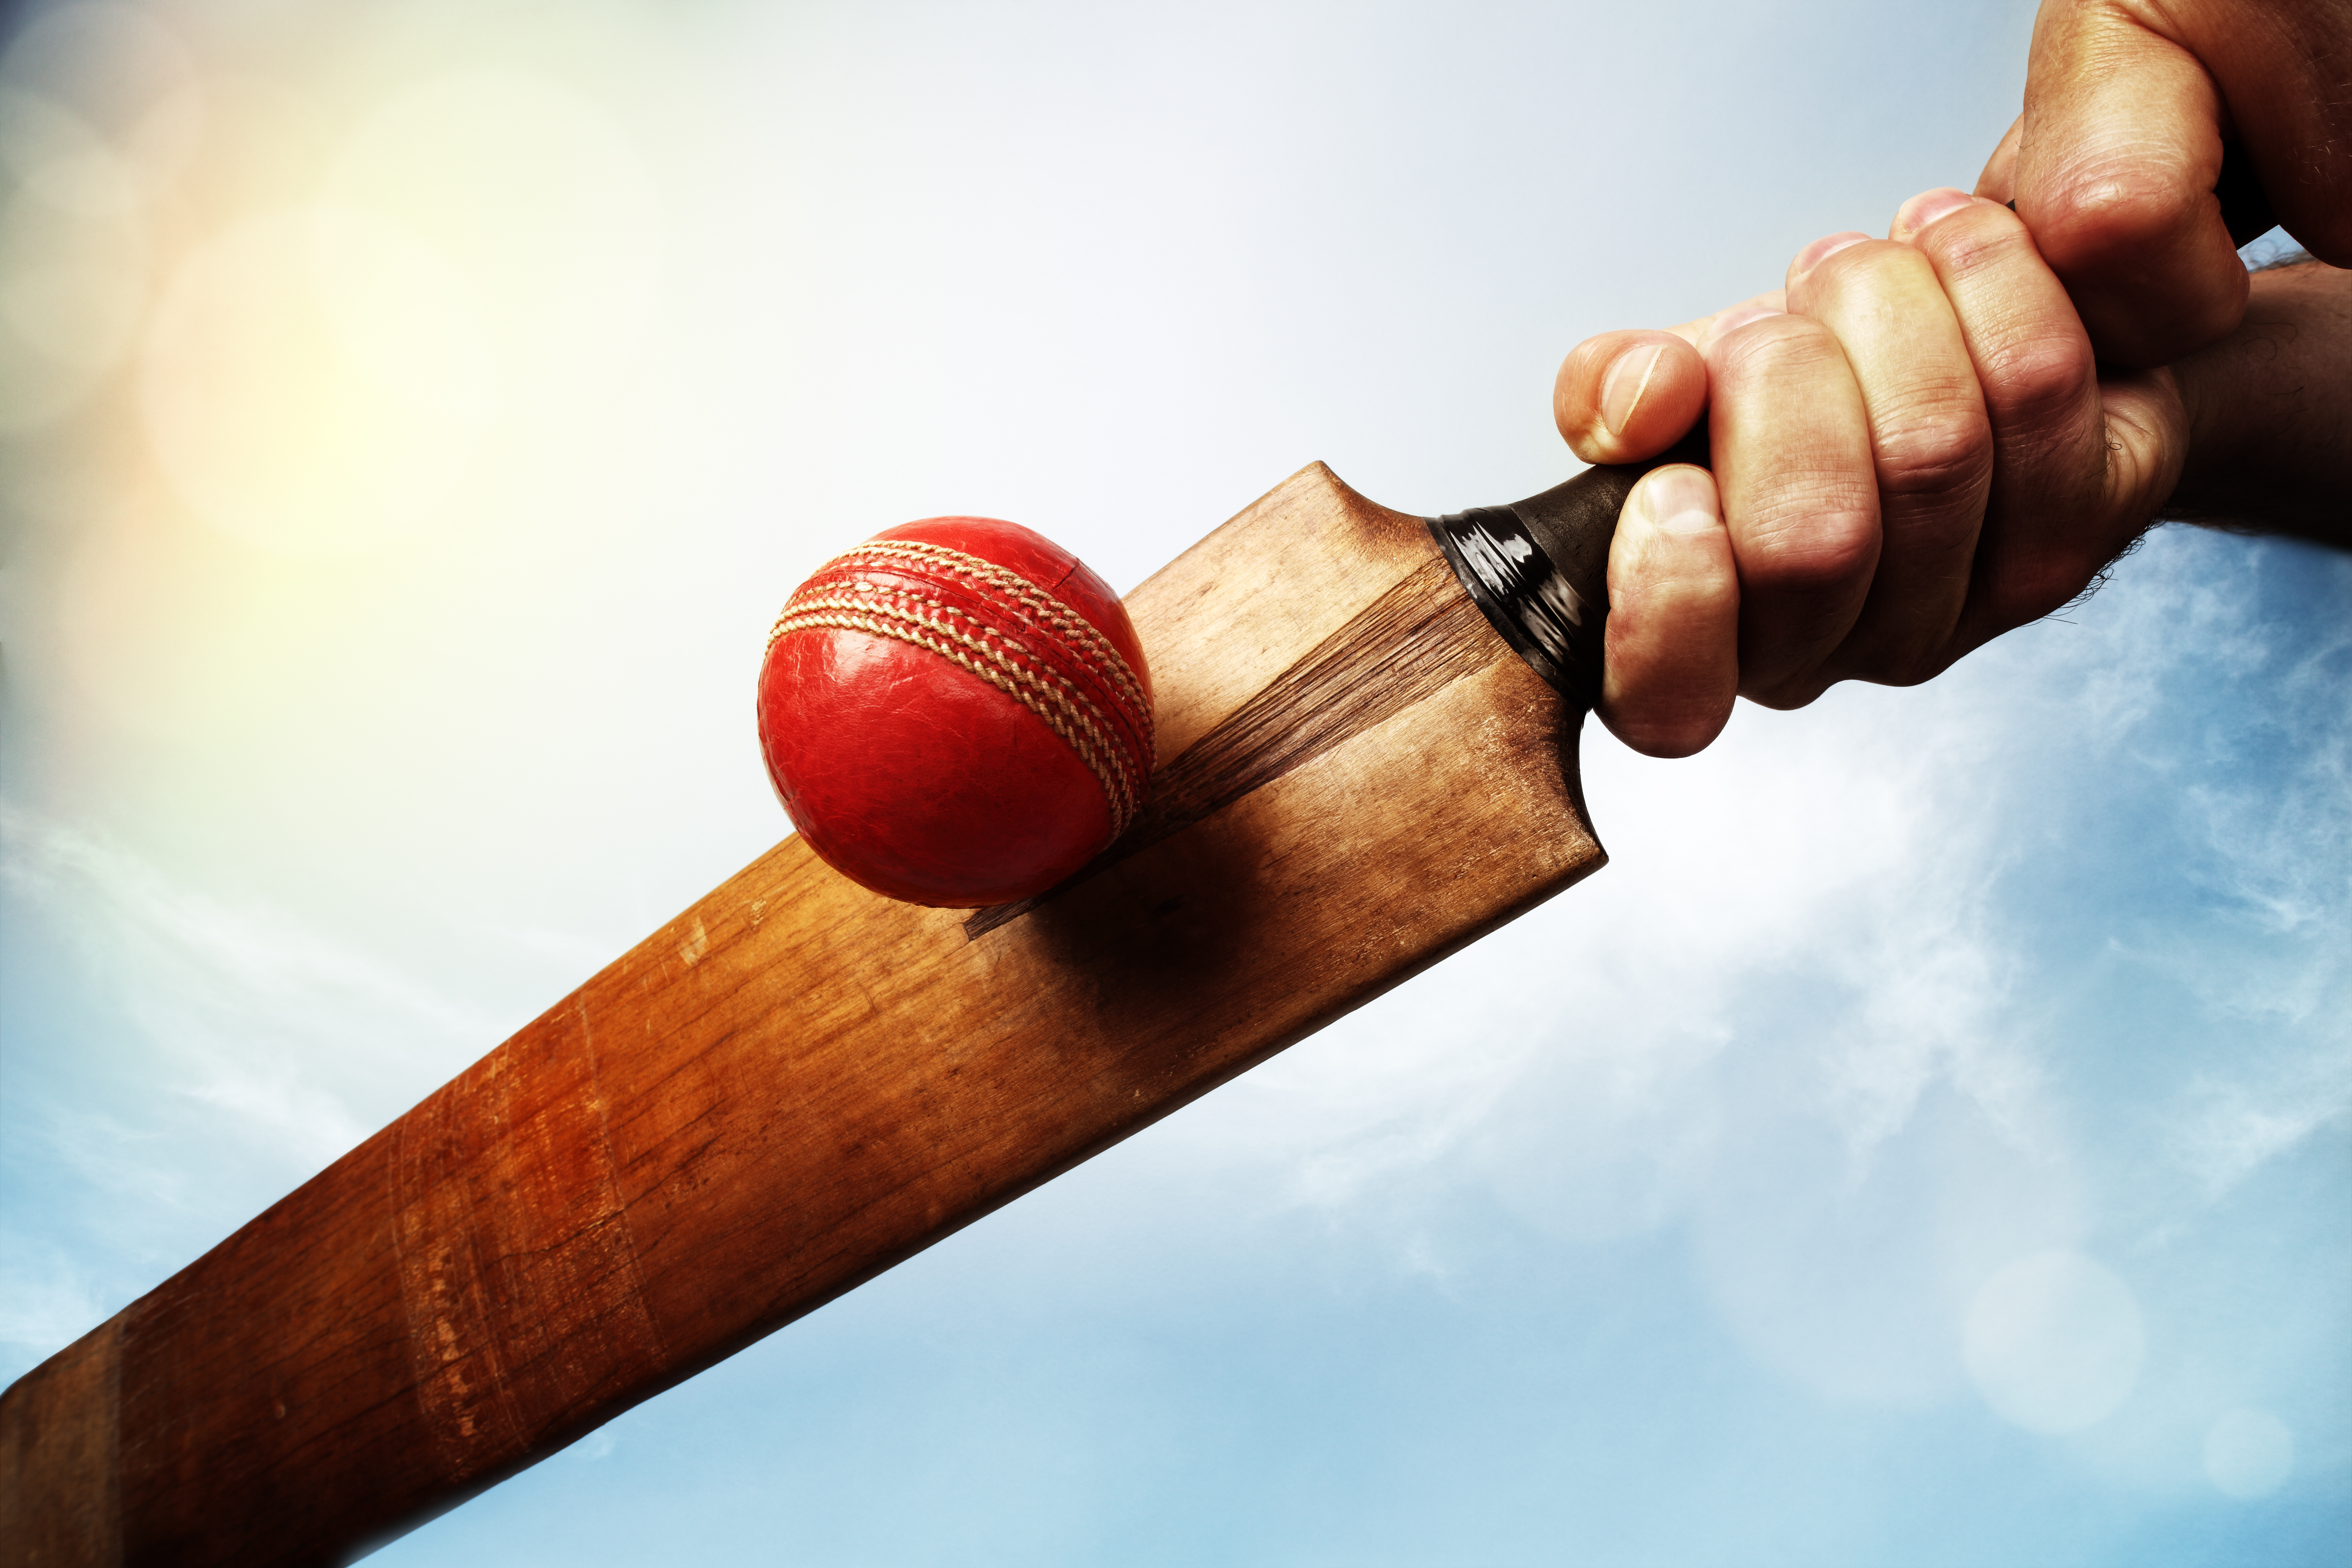 SEPSIG12: Cricketer Mental Health and Performance Conference